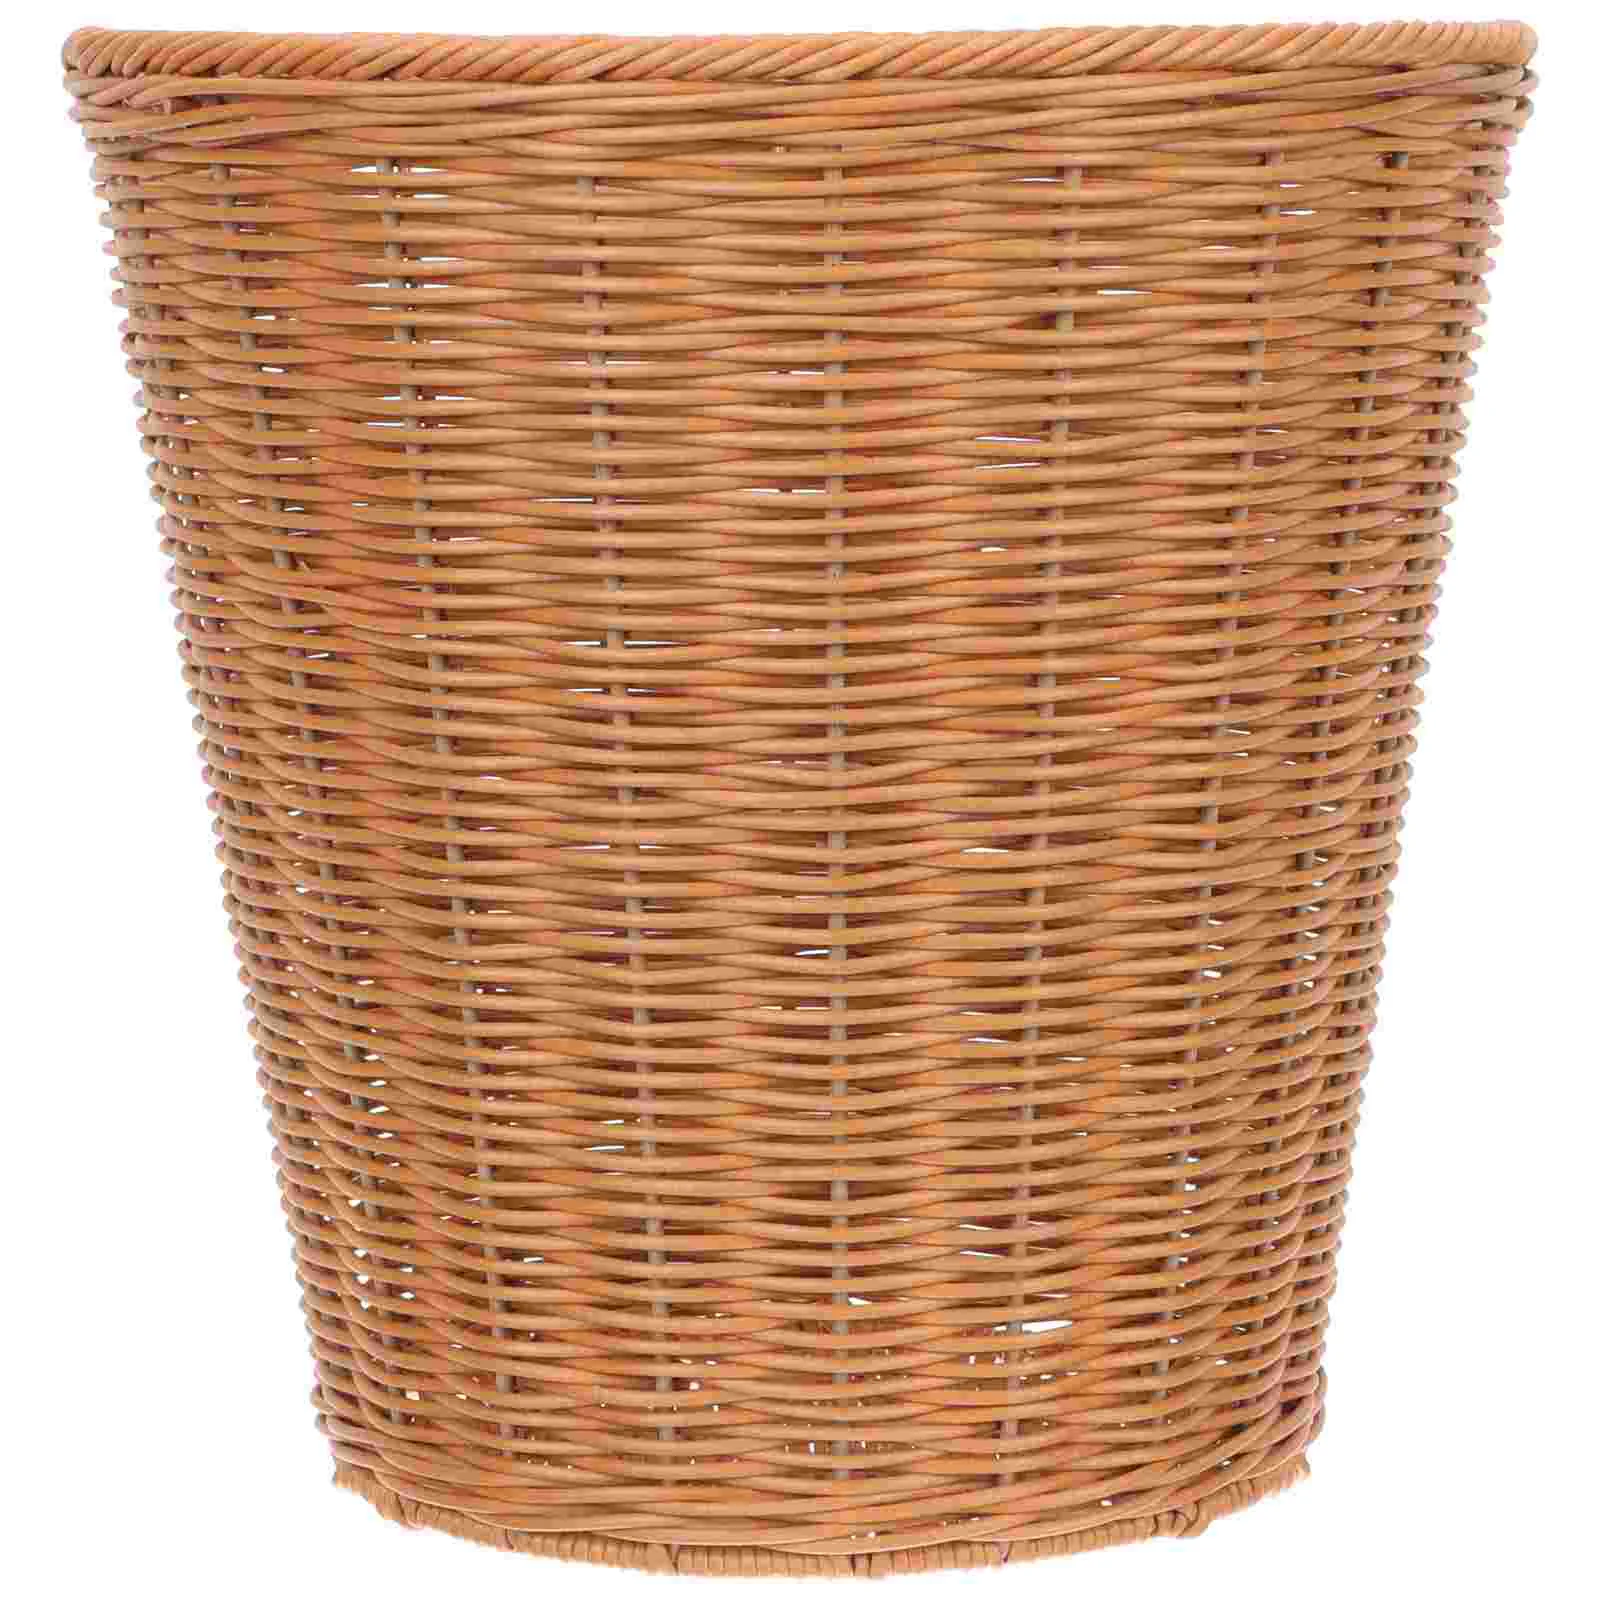 

Basket Waste Garbage Kitchen Rattan Trash Wicker Seagrass Woven Laundry Storage Containers Baskets Bin Pot Can Water